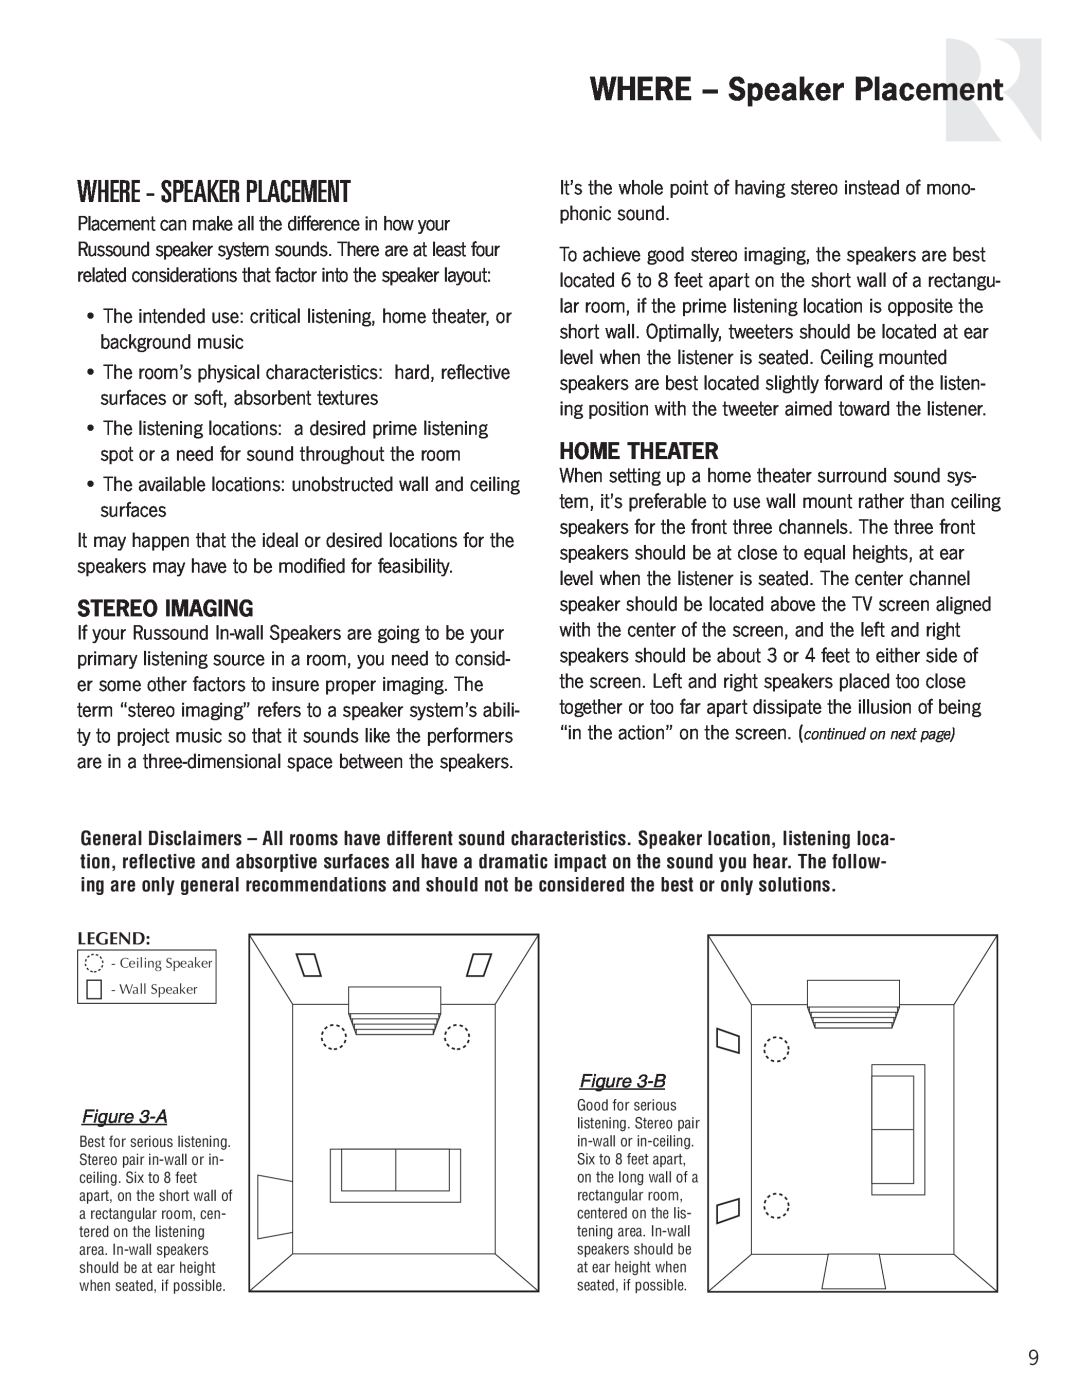 Russound In-Ceiling speaker owner manual WHERE - Speaker Placement, Where - Speaker Placement, Stereo Imaging, Home Theater 